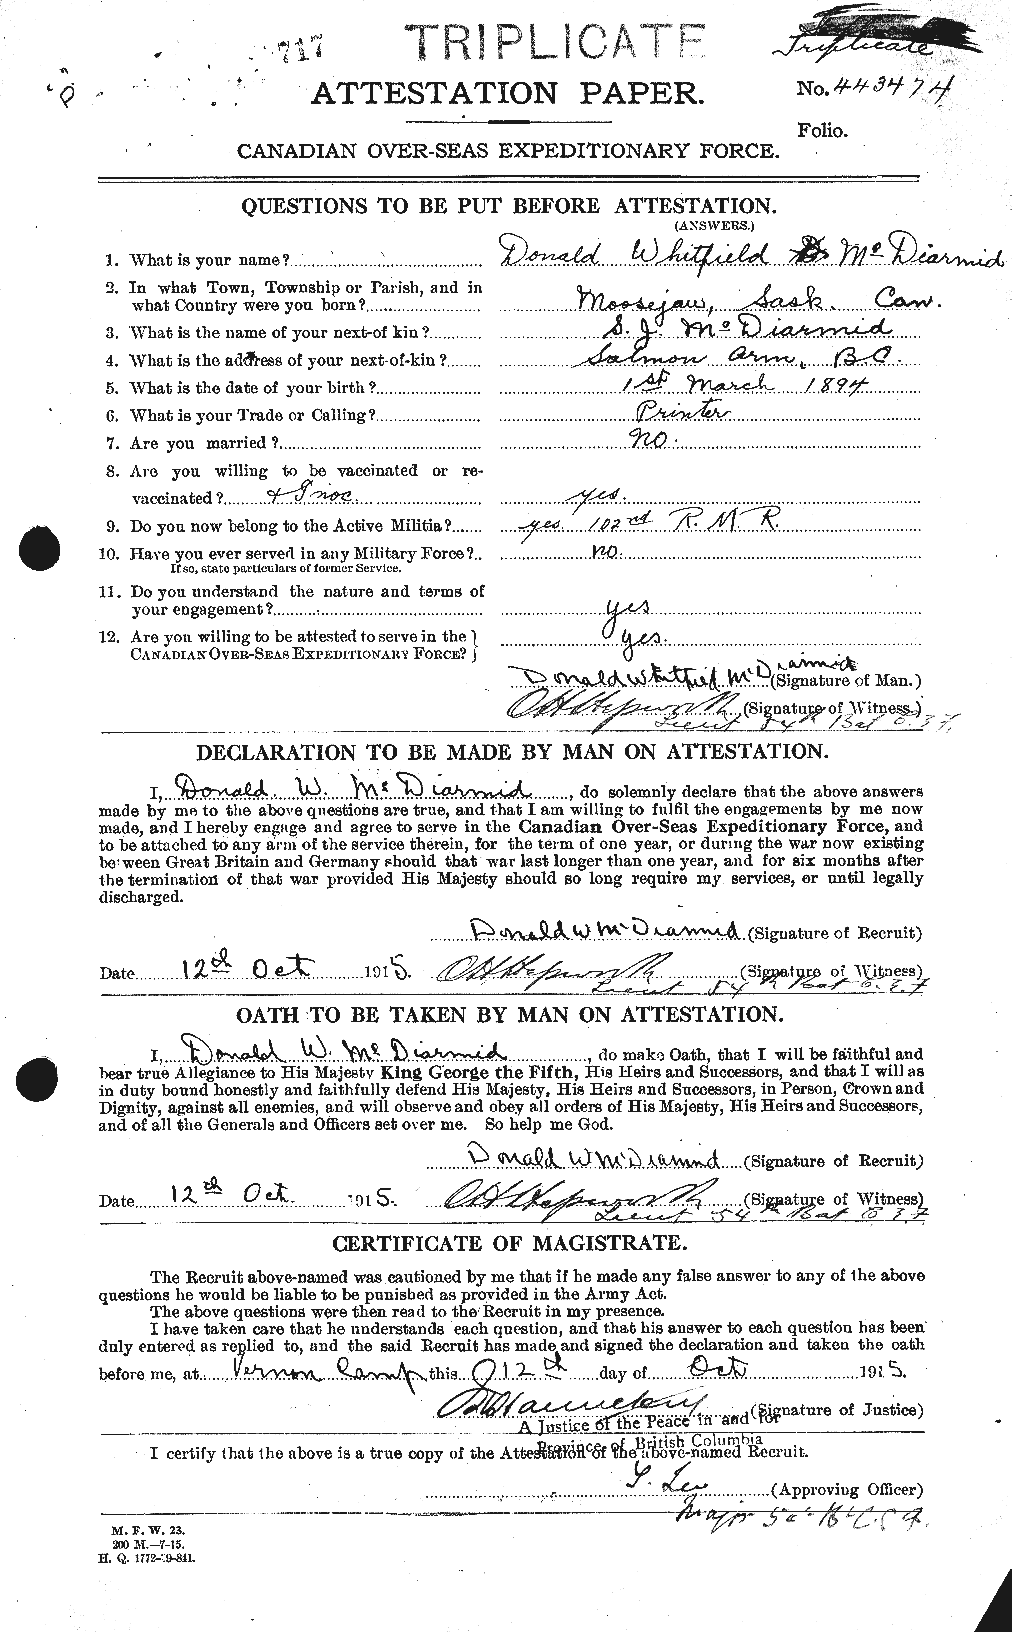 Personnel Records of the First World War - CEF 517142a